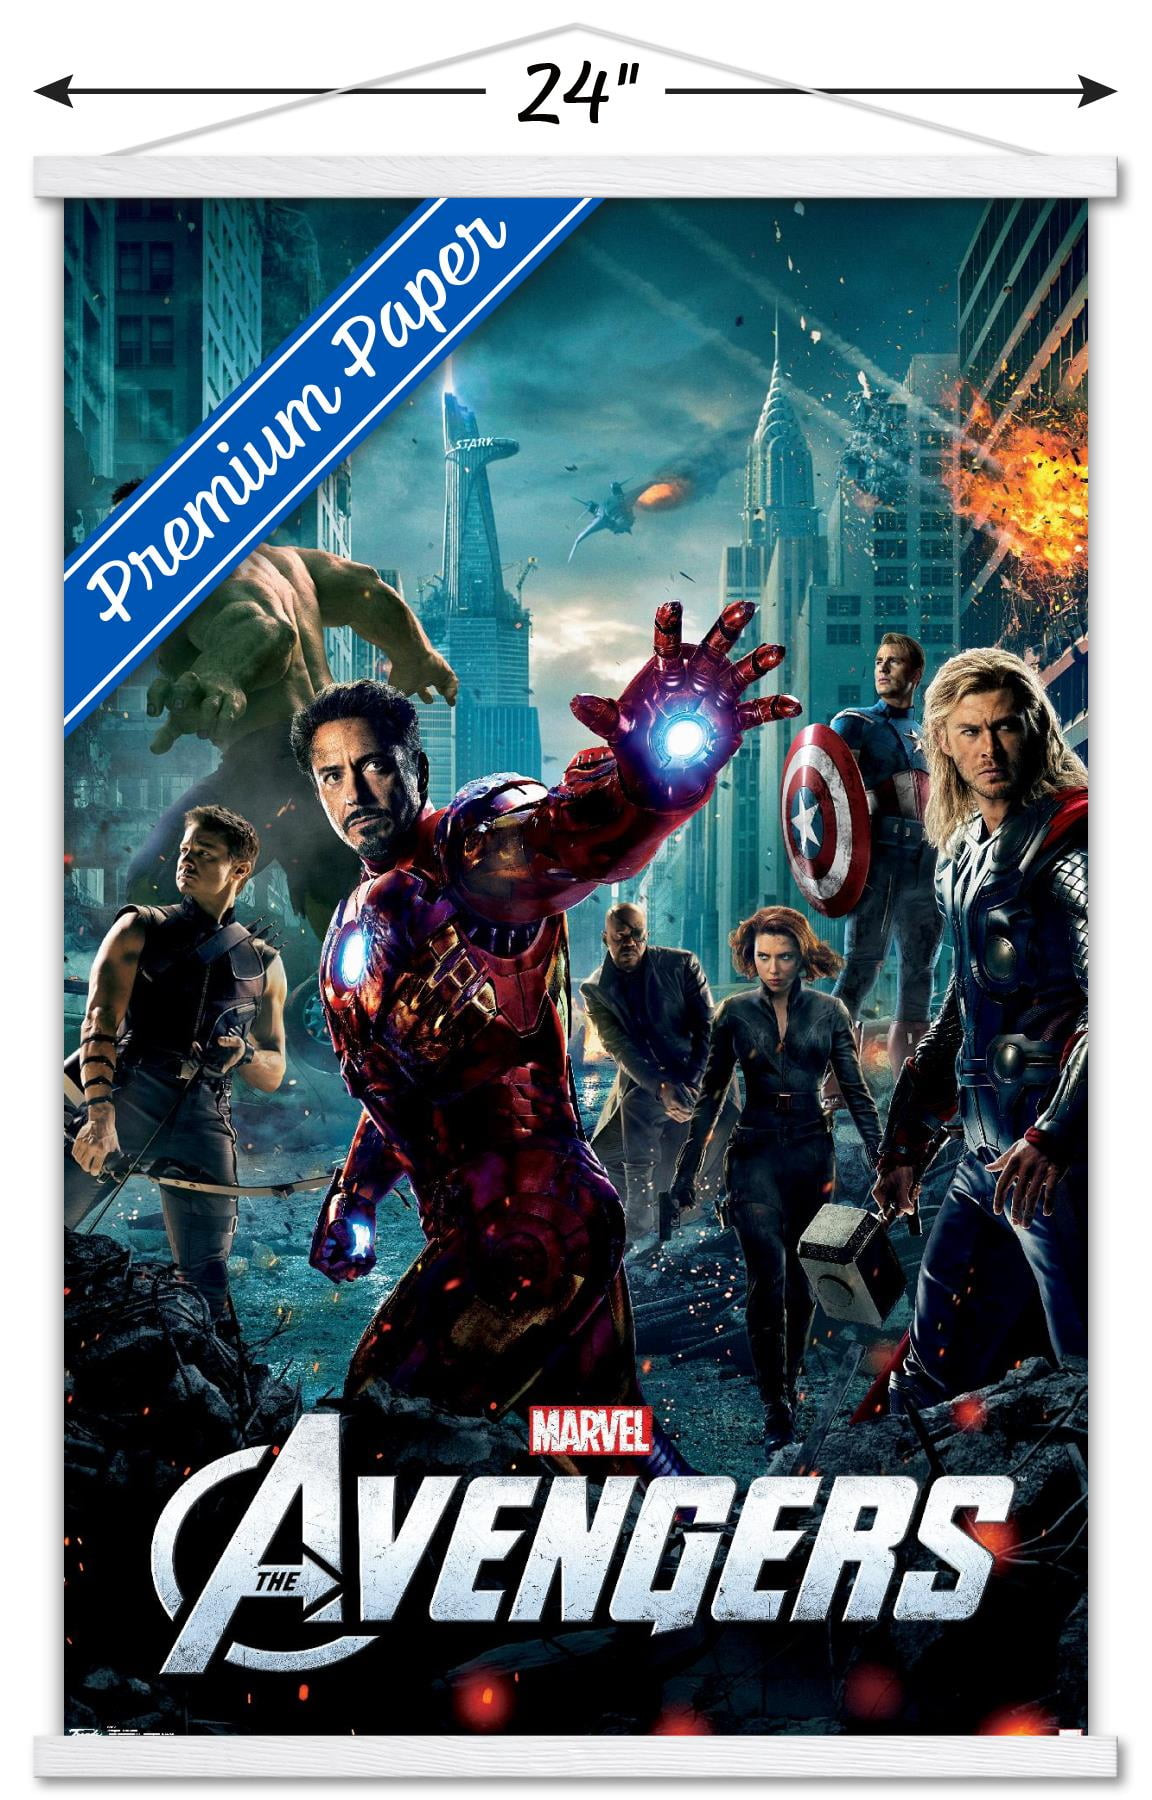 NEW Avengers INFINITY WAR LARGE 24" x 36" MOVIE POSTER SHIPS FOLDED IN 16ths 